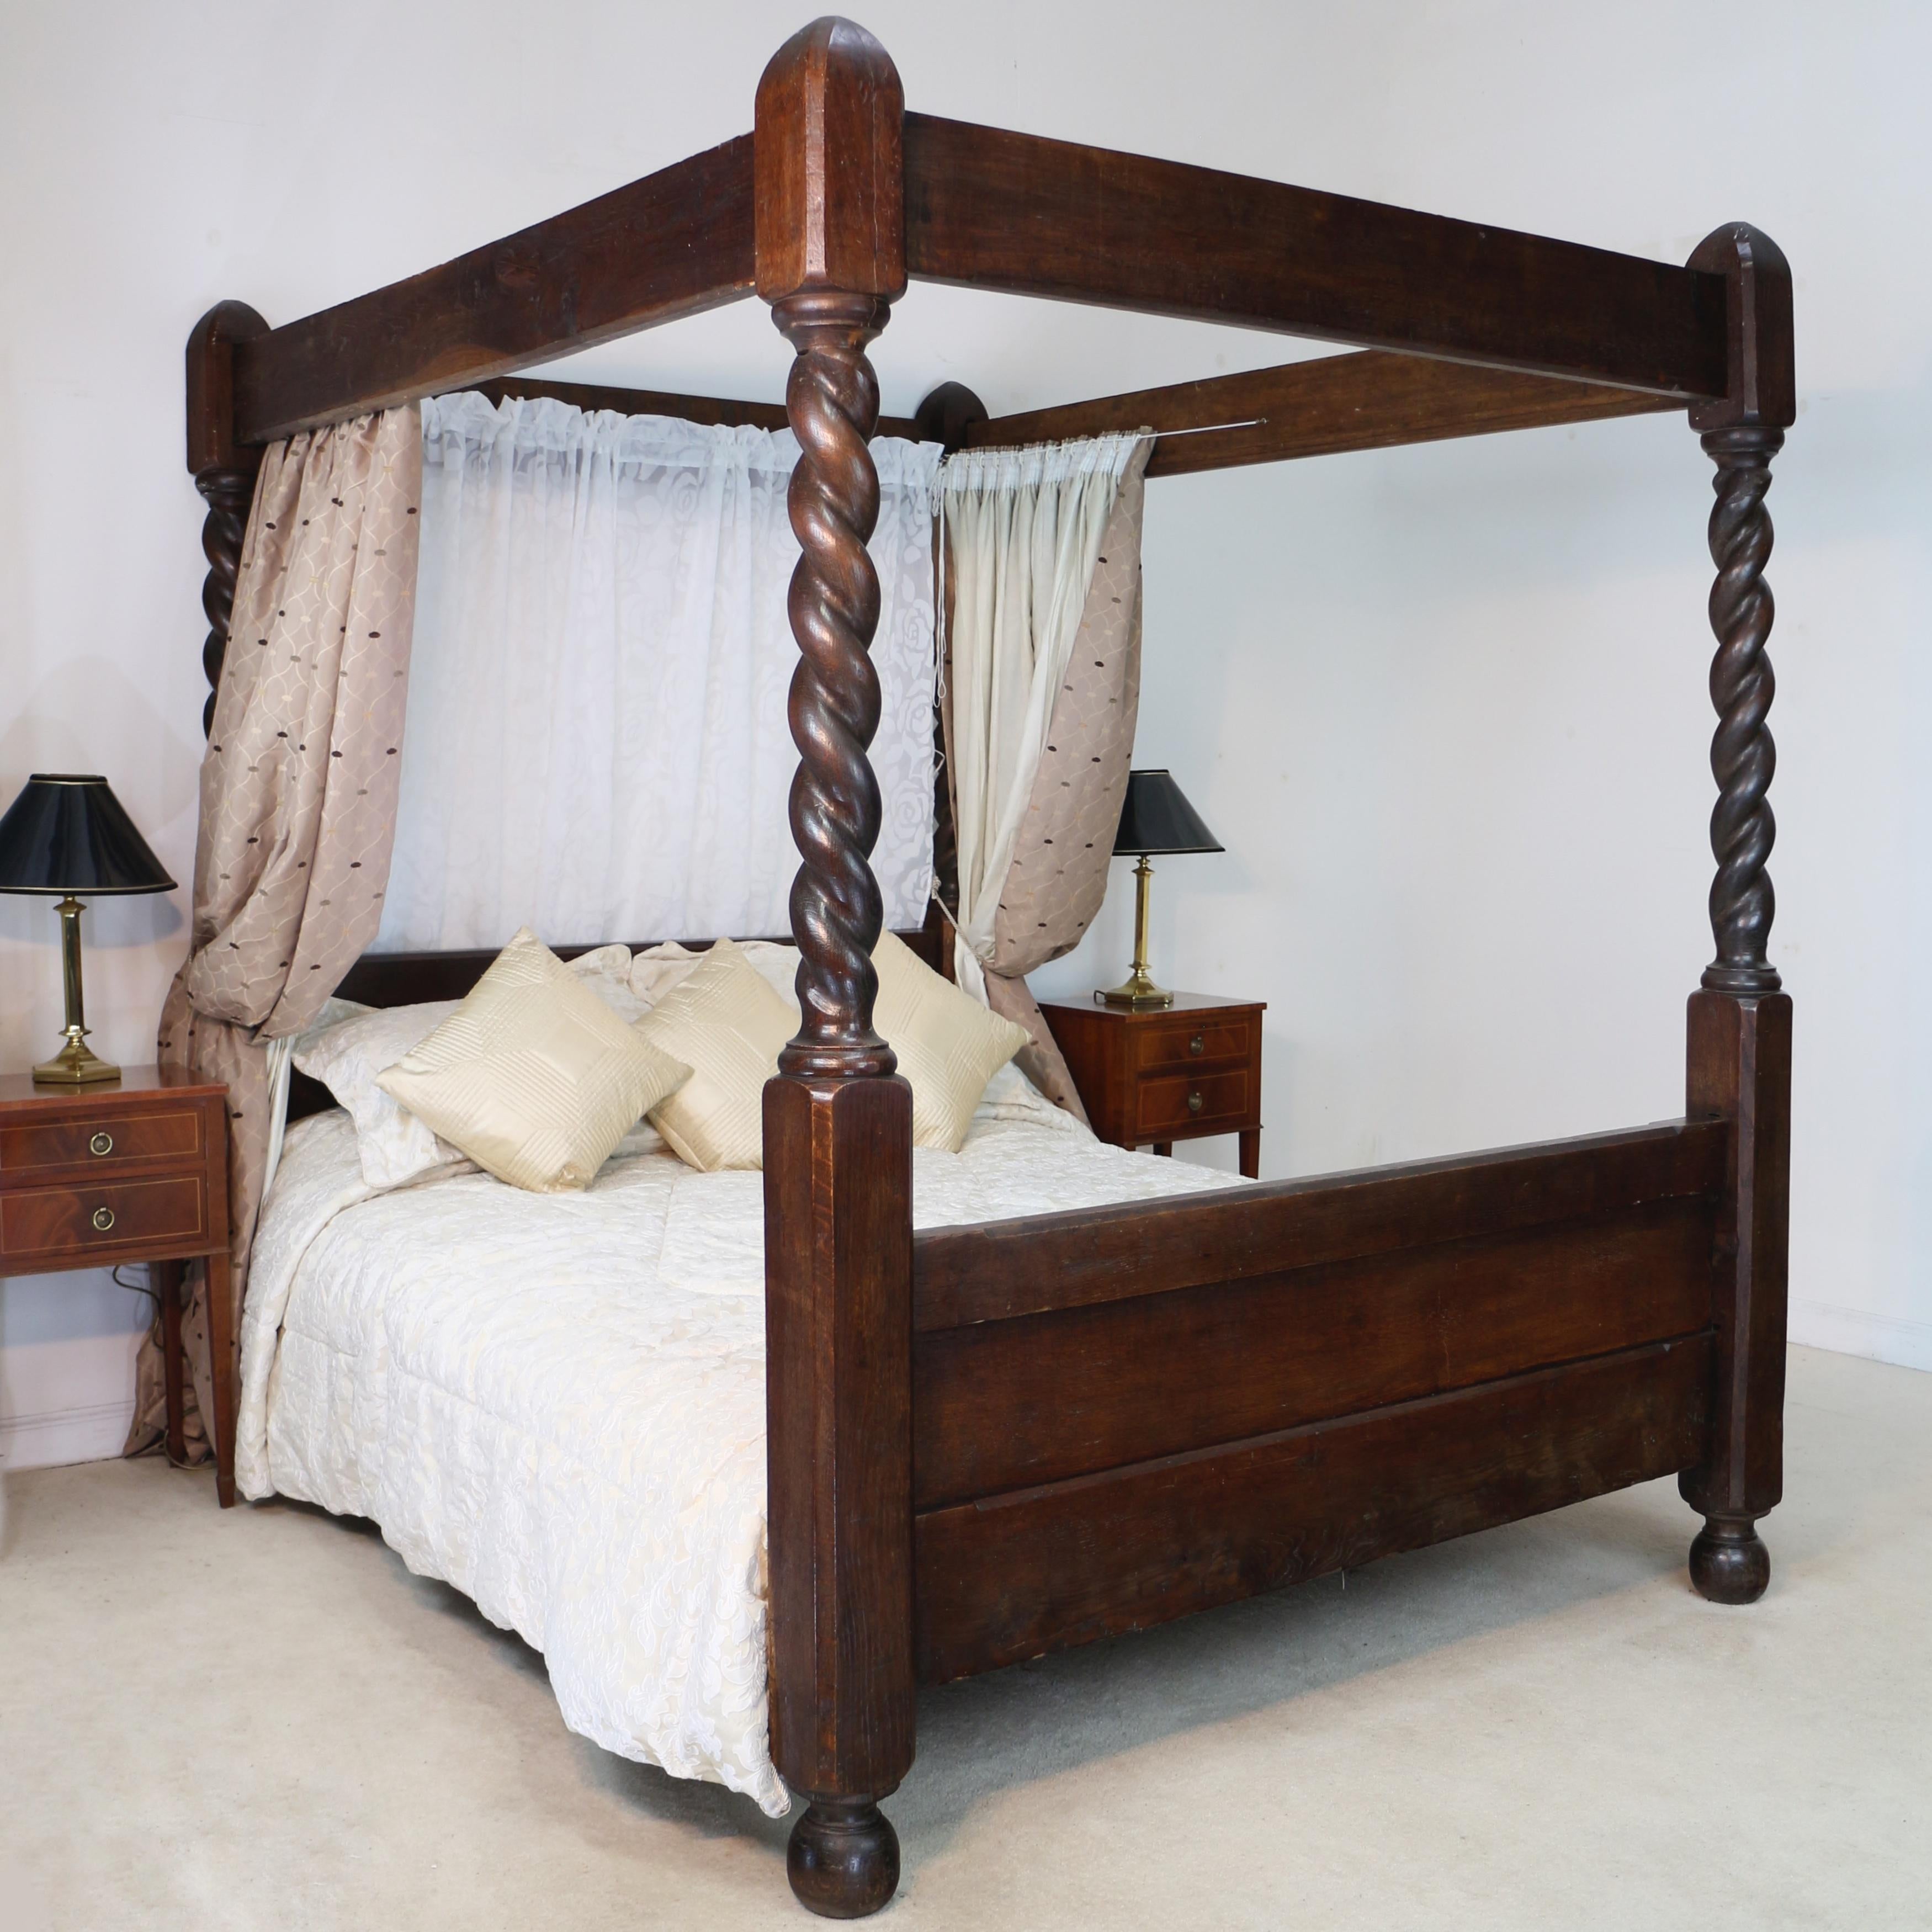 A rare Victorian oak four poster bed with barley twist columns to the head and foot. Chamfered edges give an Arts & Crafts feel and it stands on flattened bun feet. Comes with a slatted base to support a mattress. In good condition it does have some